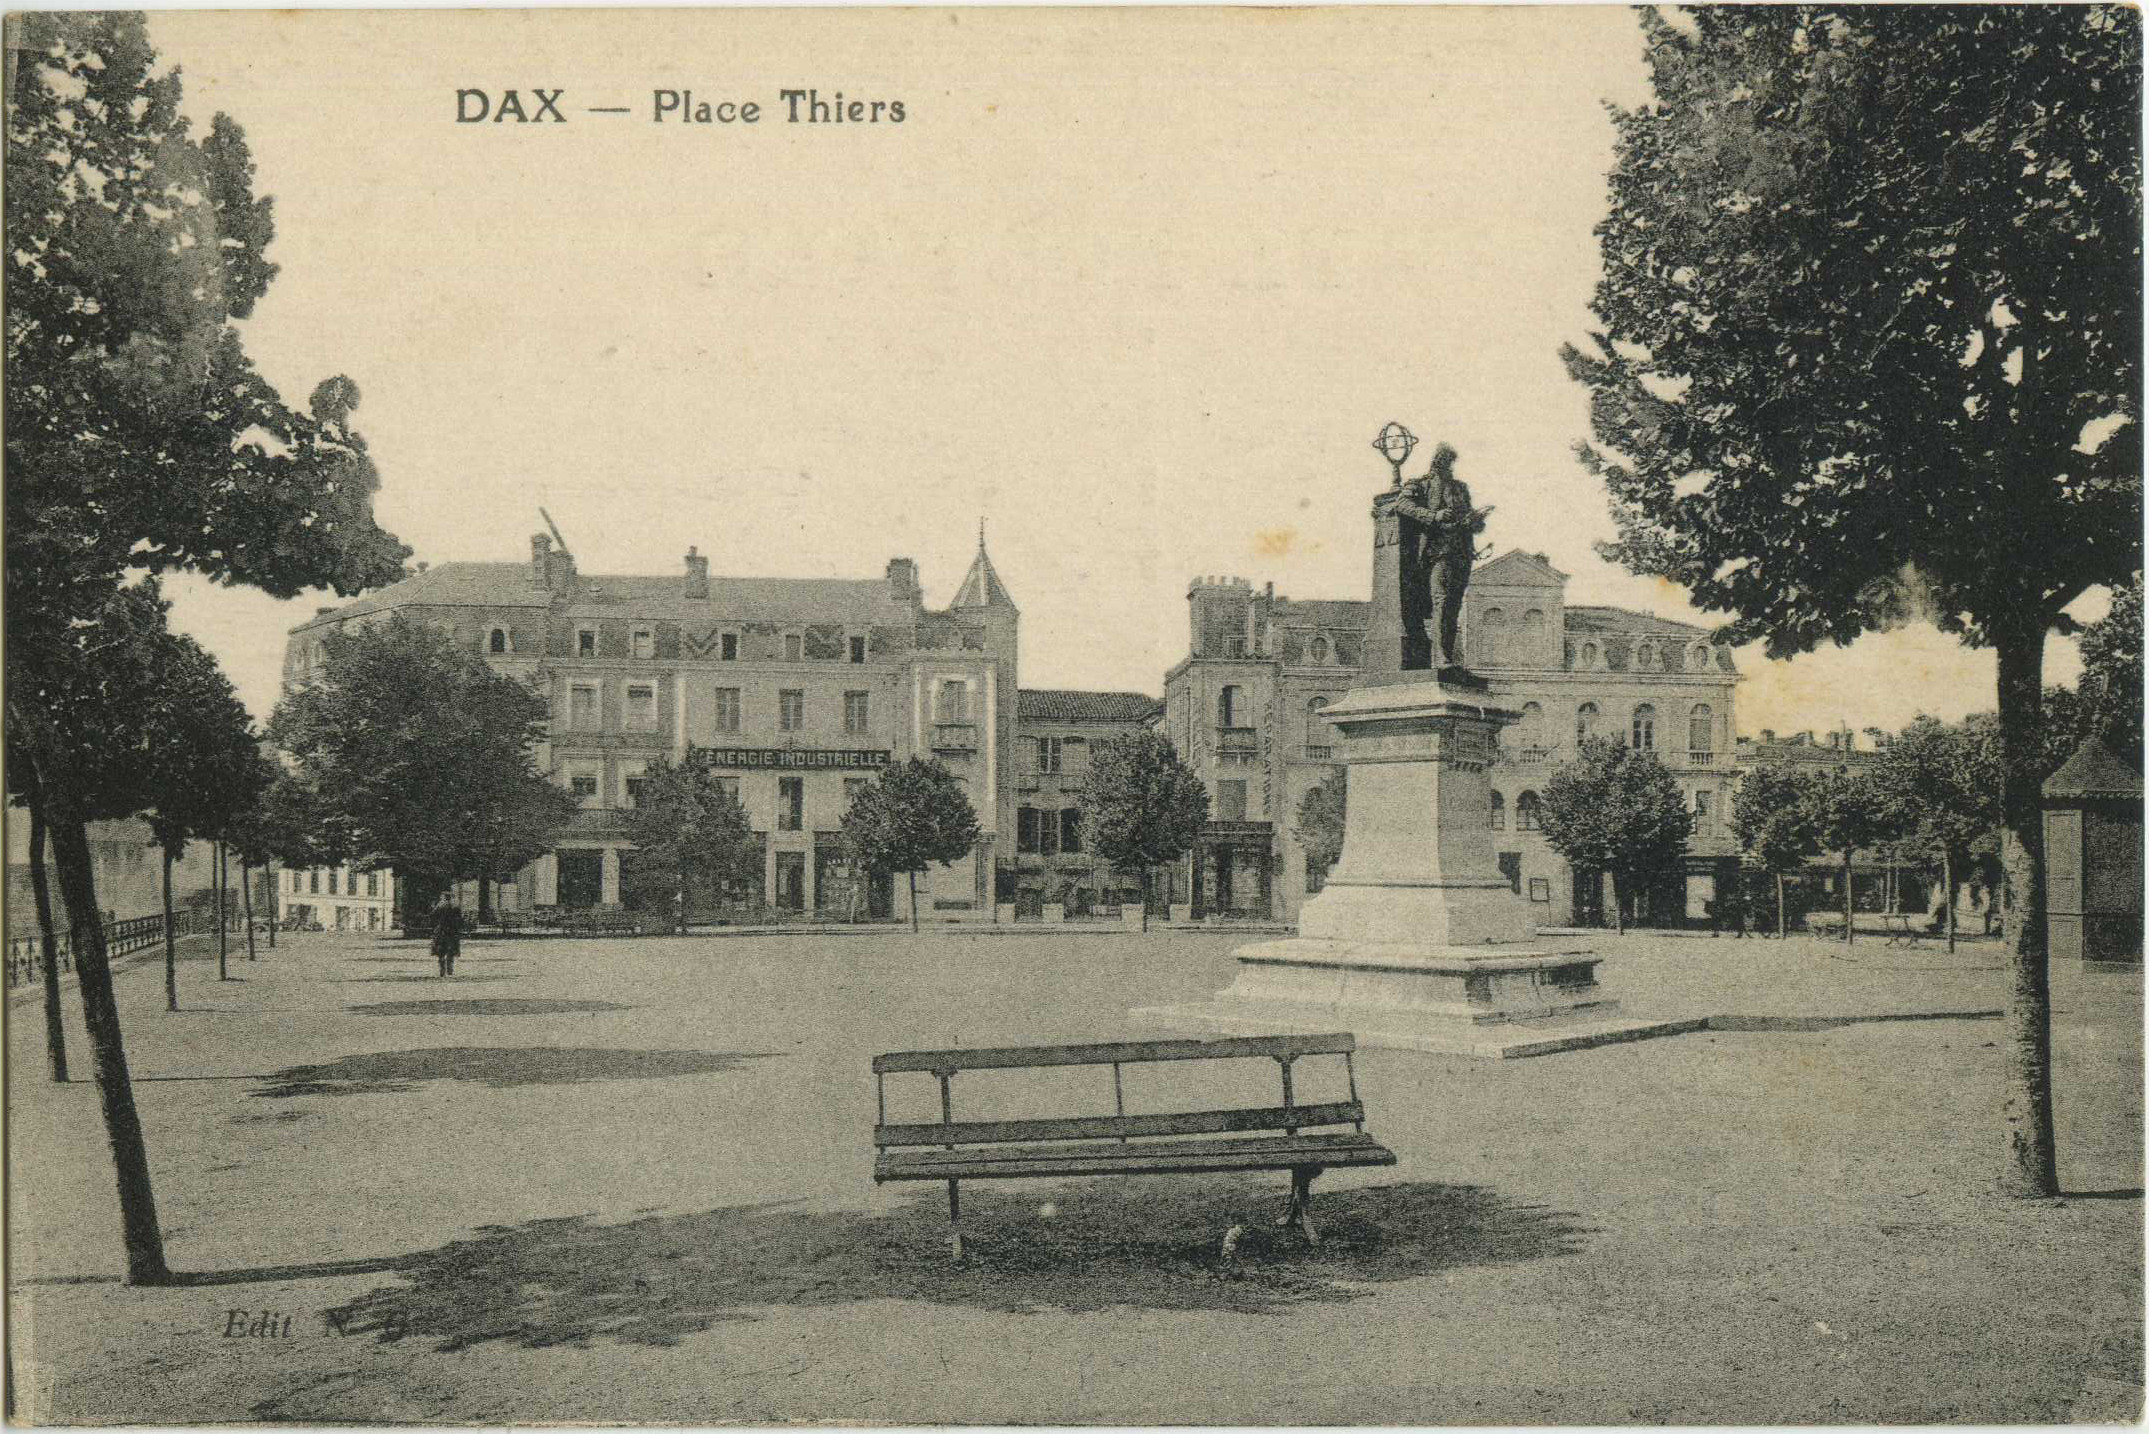 Dax - Place Thiers